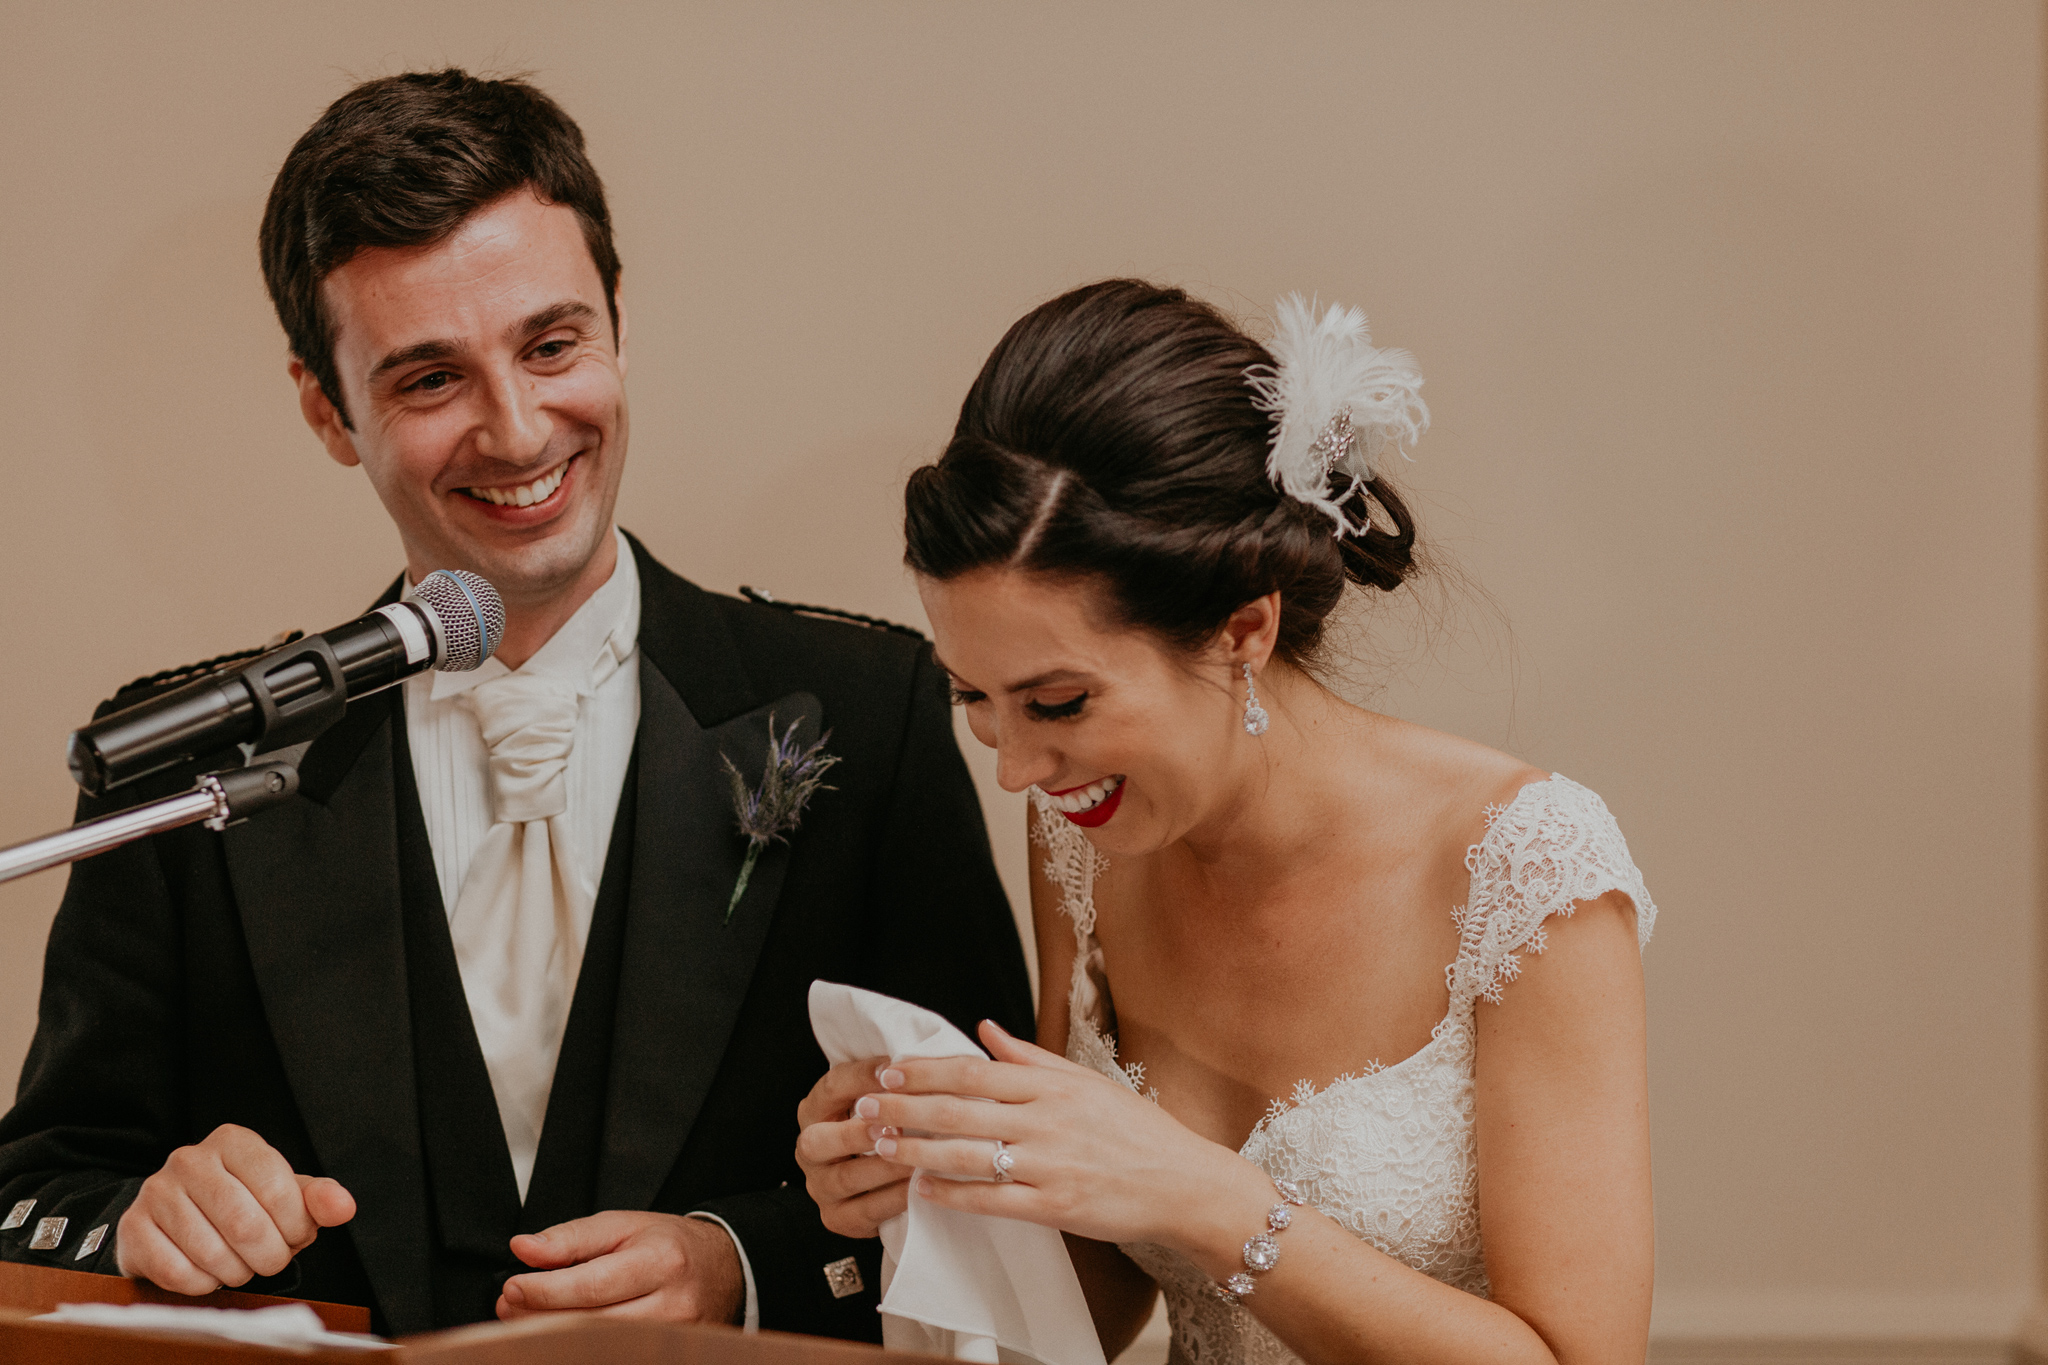 Bride and groom laugh in candid photo during speech